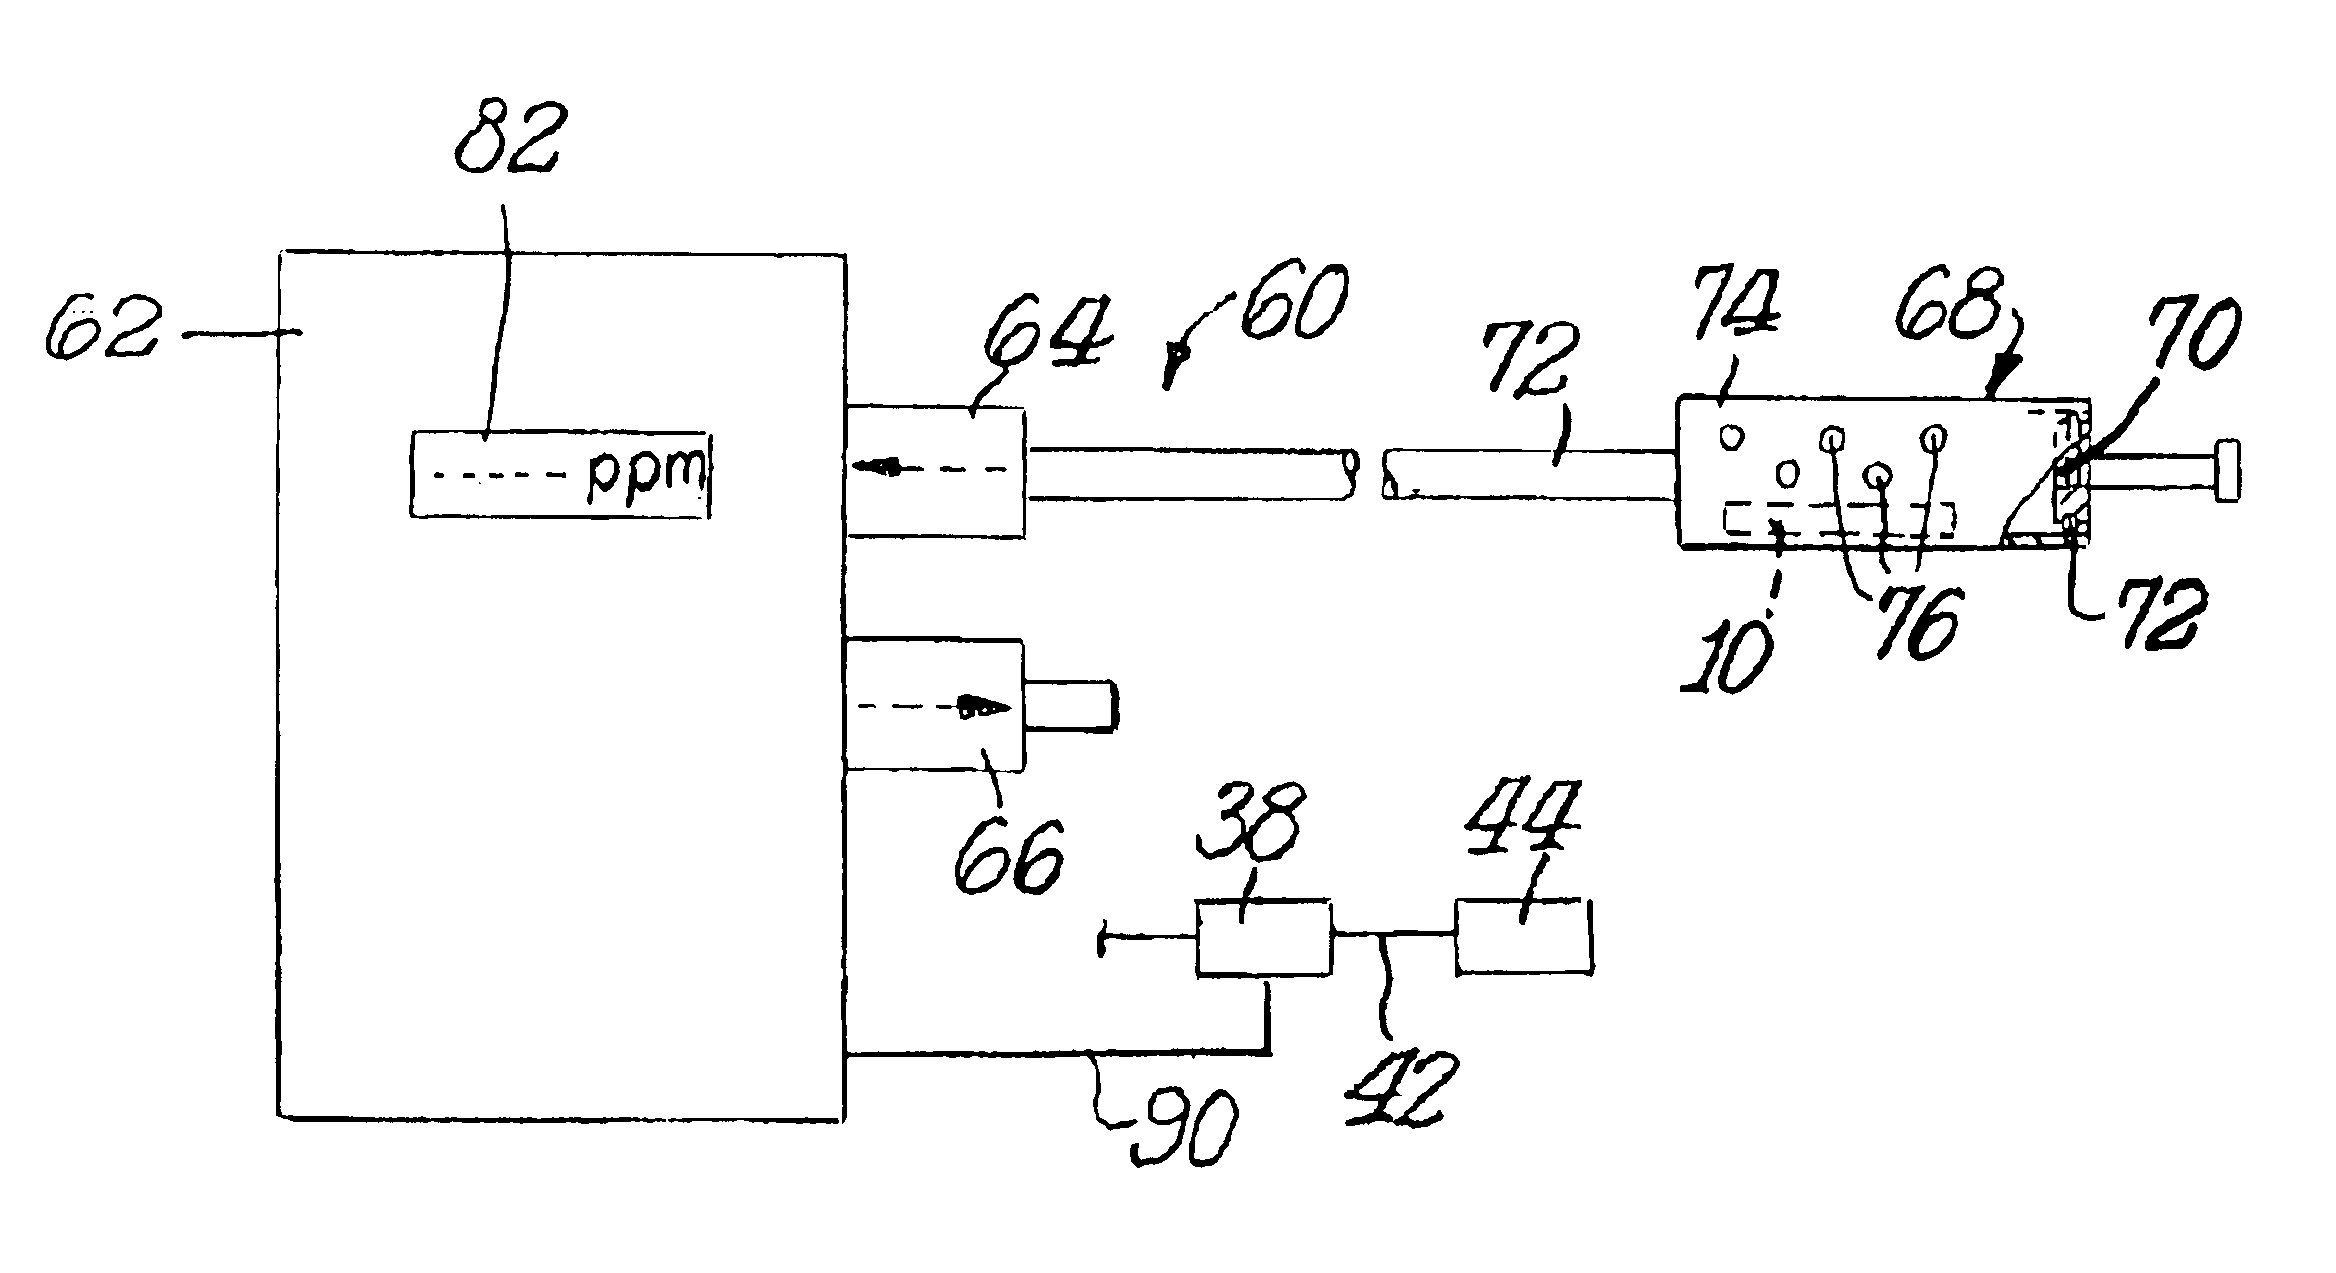 Flavor monitoring system and method